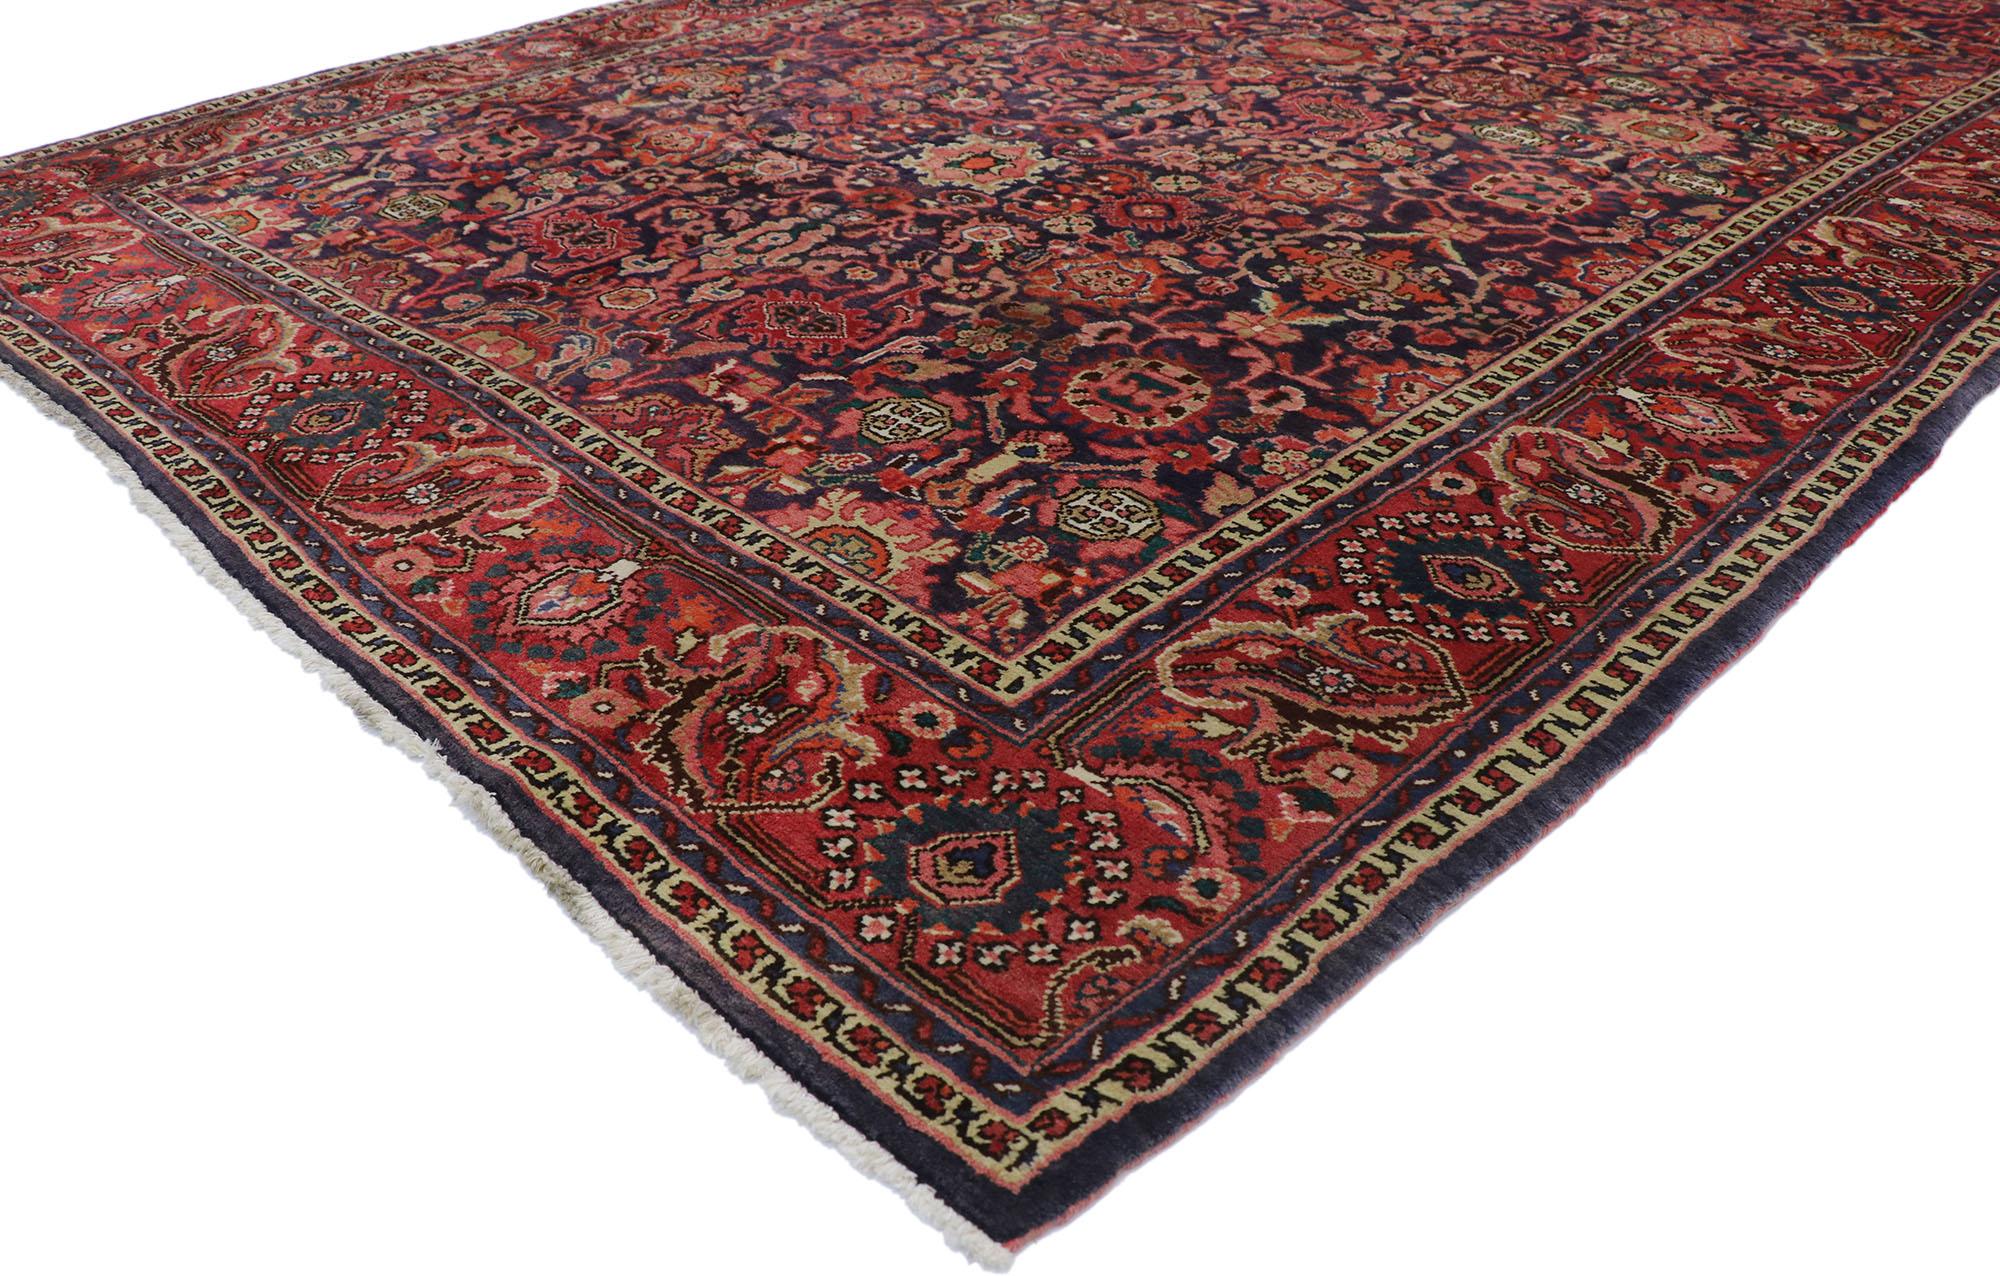 77630 Antique Persian Malayer Rug with Regal Victorian style. Emanating a timeless floral design and austere elegance, this hand-knotted wool antique Persian Malayer rug beautifully embodies a regal Victorian style. The abrashed navy blue field is